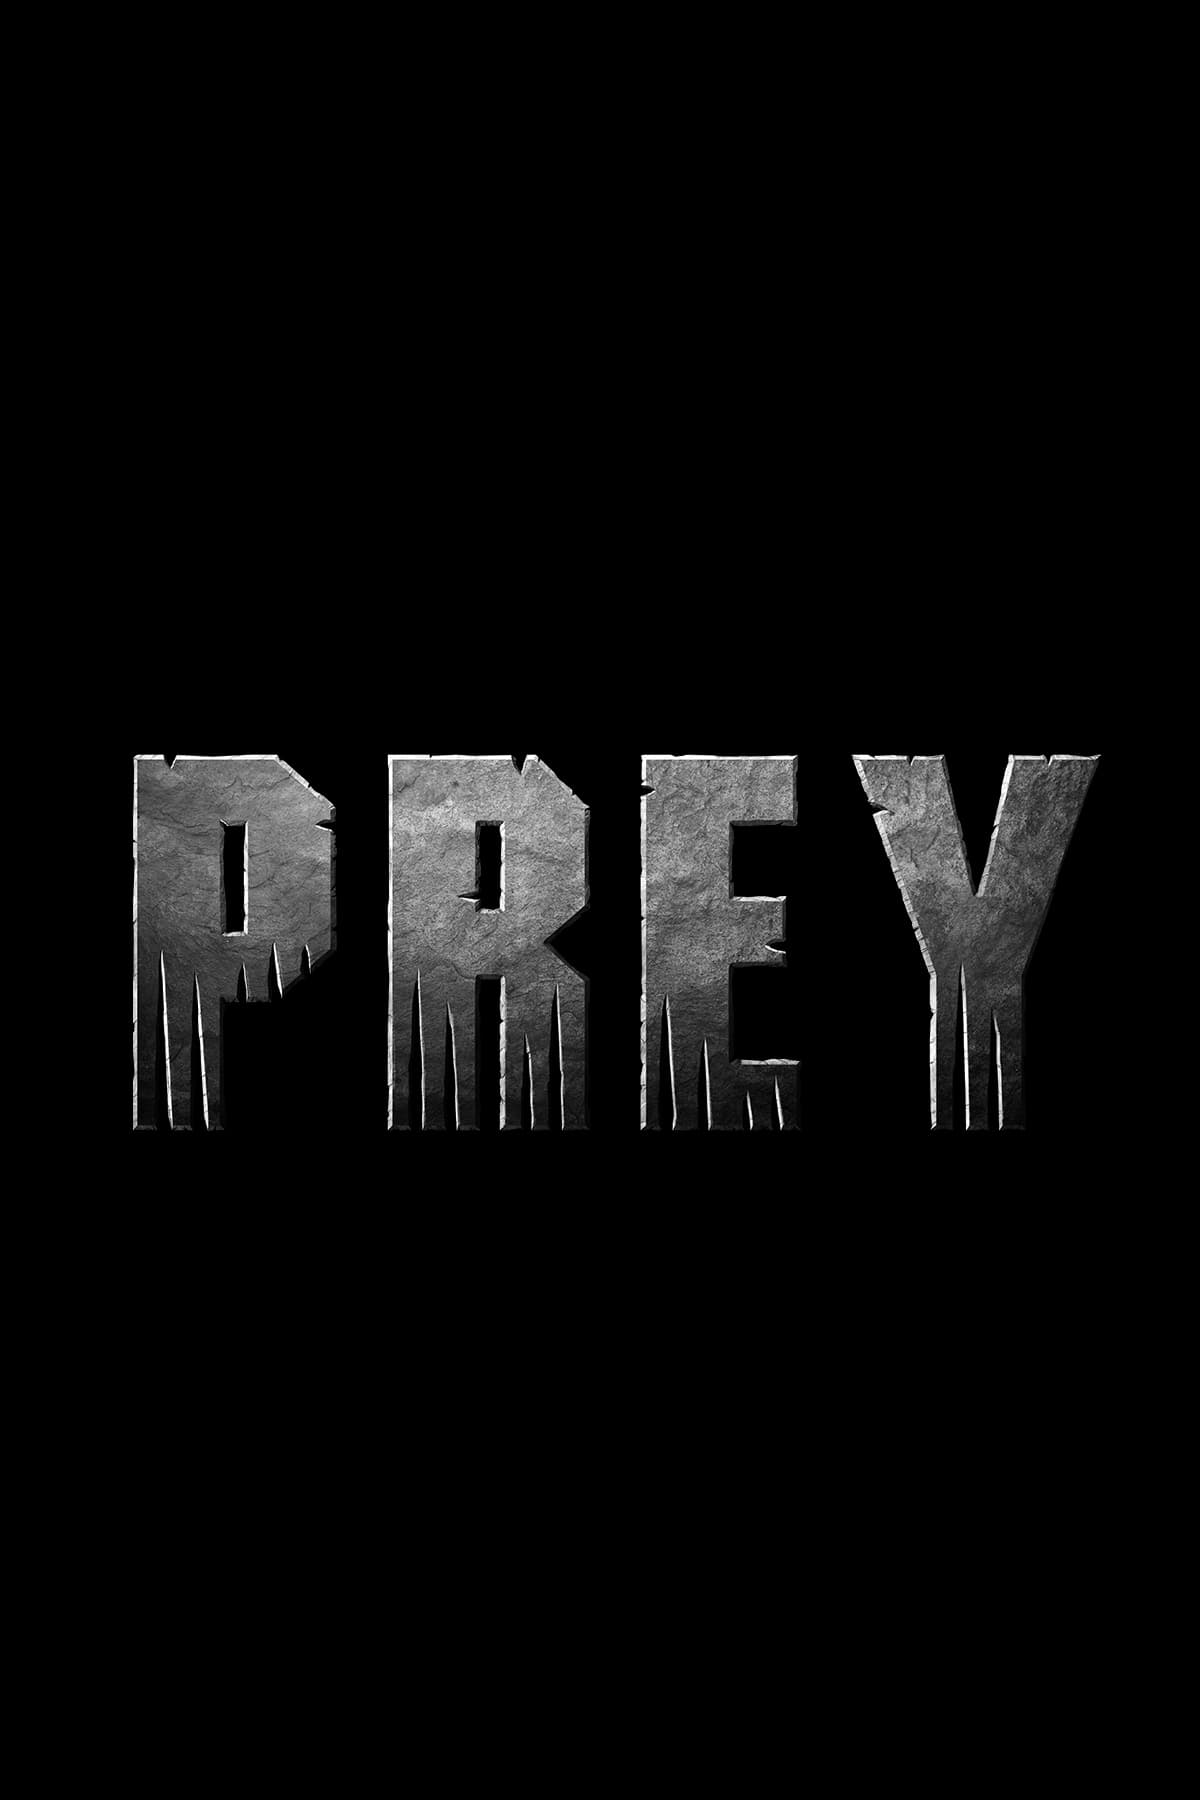 Poster for the movie "Prey"